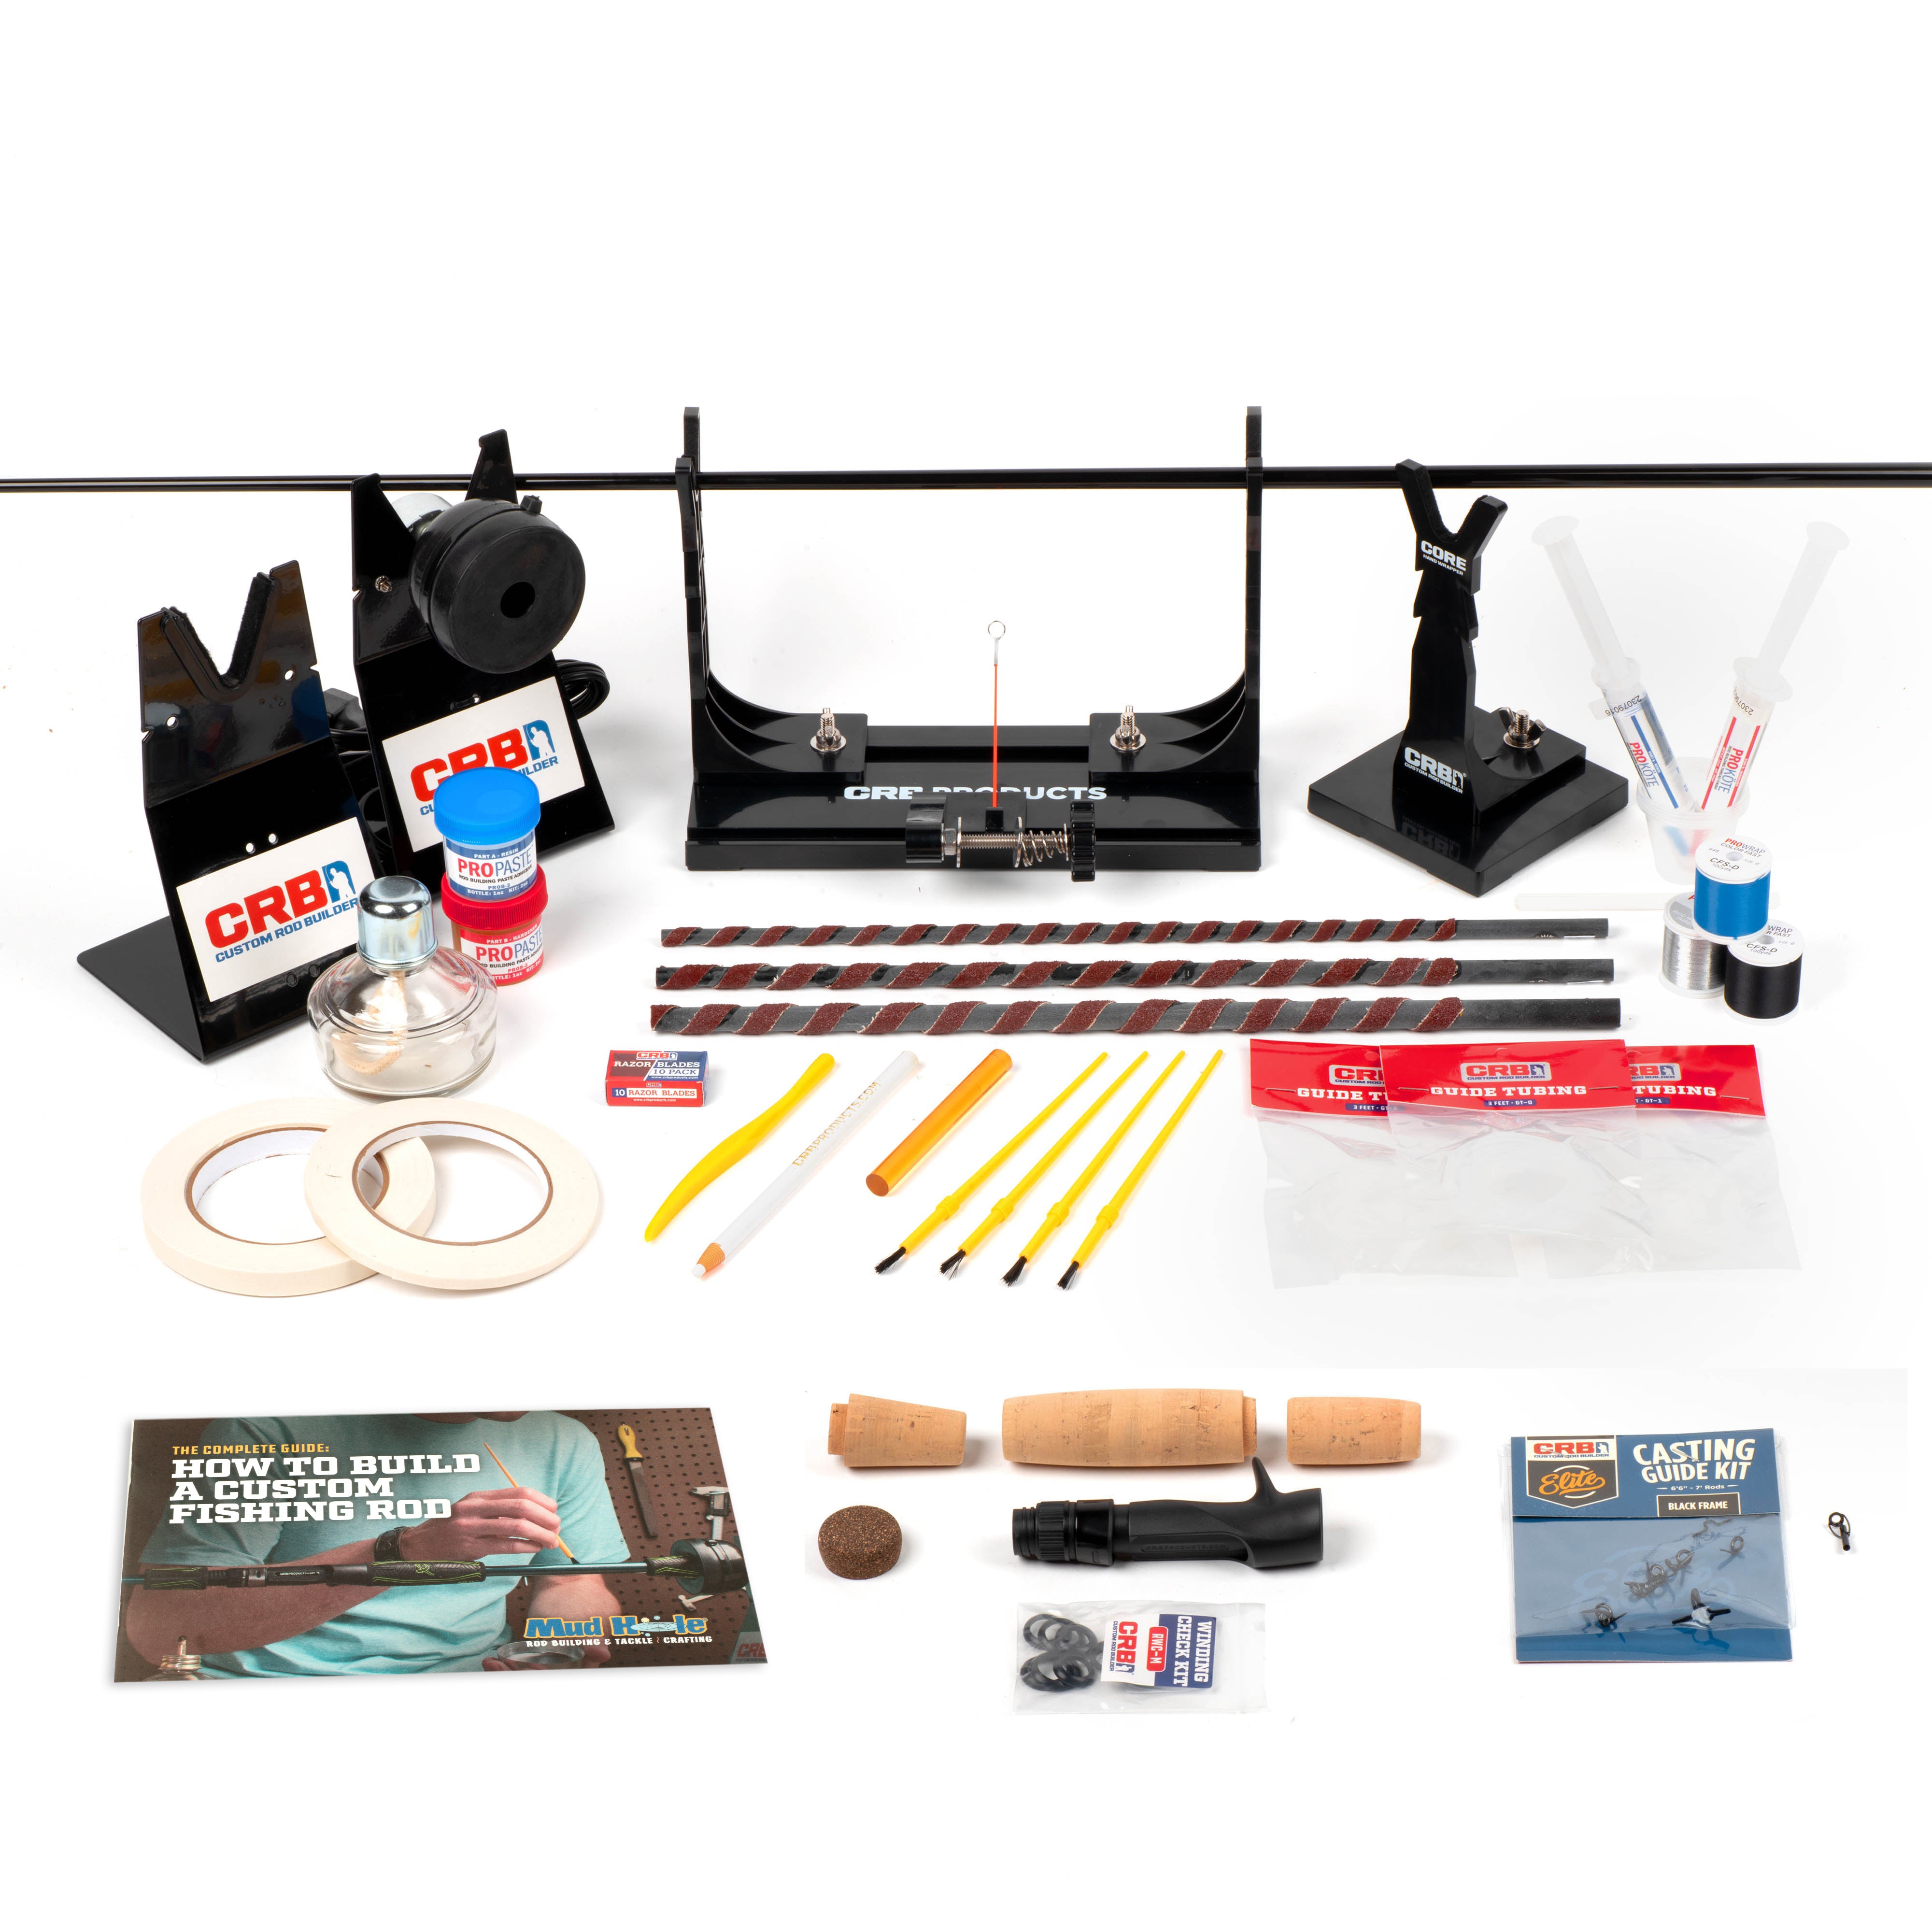 All In One Rod Building Kit – ICF905 9' 5wt Fly